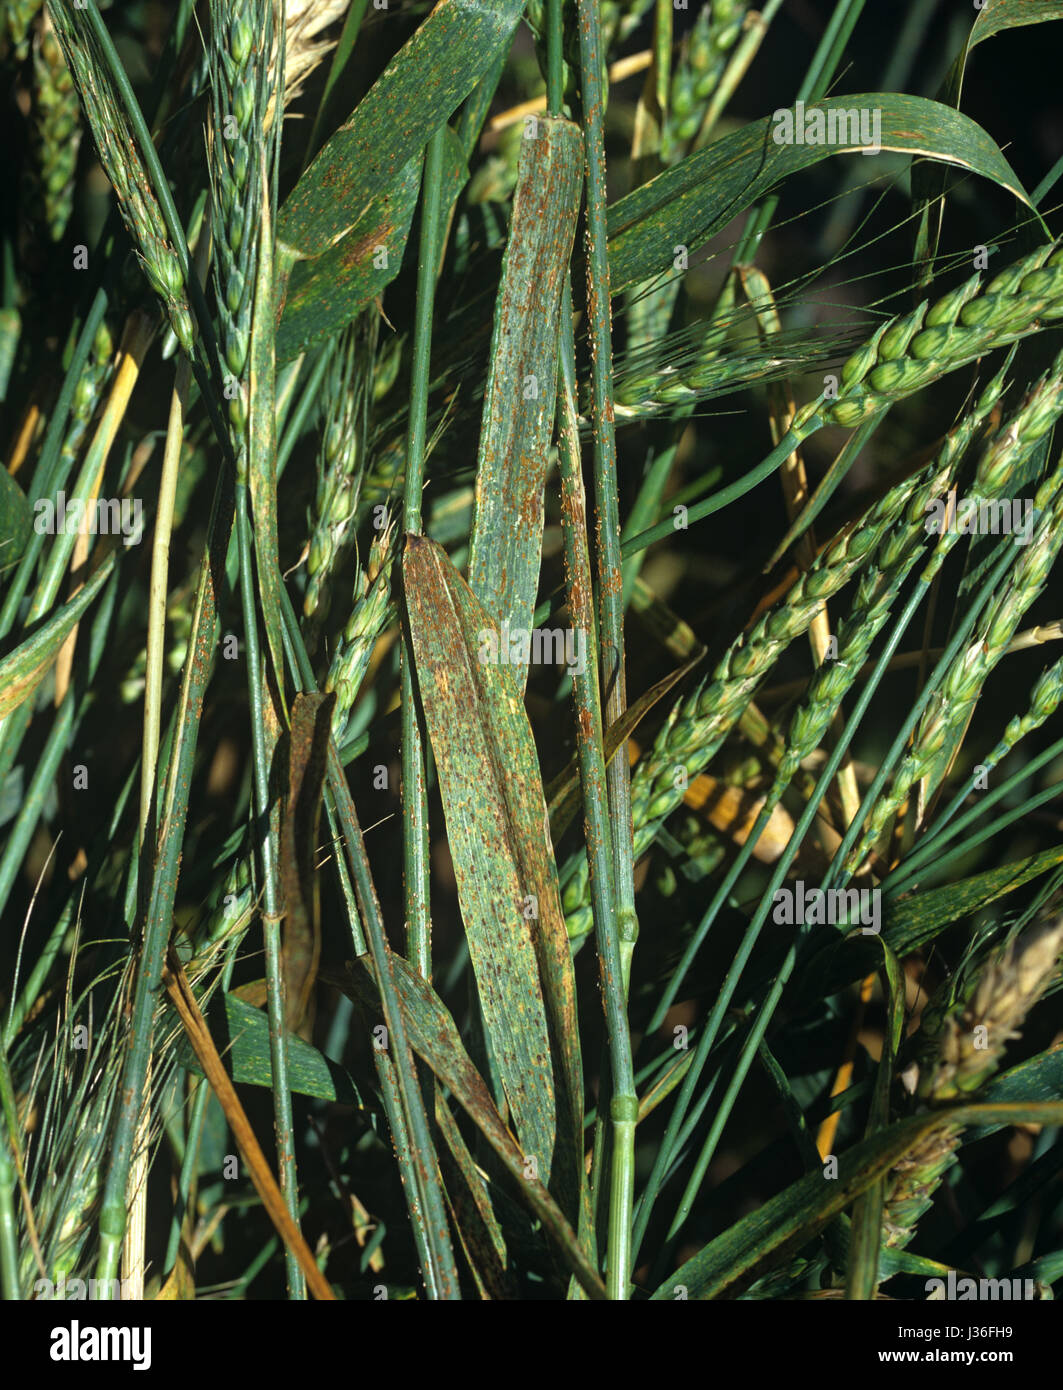 Black stem rust, Puccinia graminis f.sp. tritici, infection on durum awned wheat in green ear, Minnesota, USA, July Stock Photo